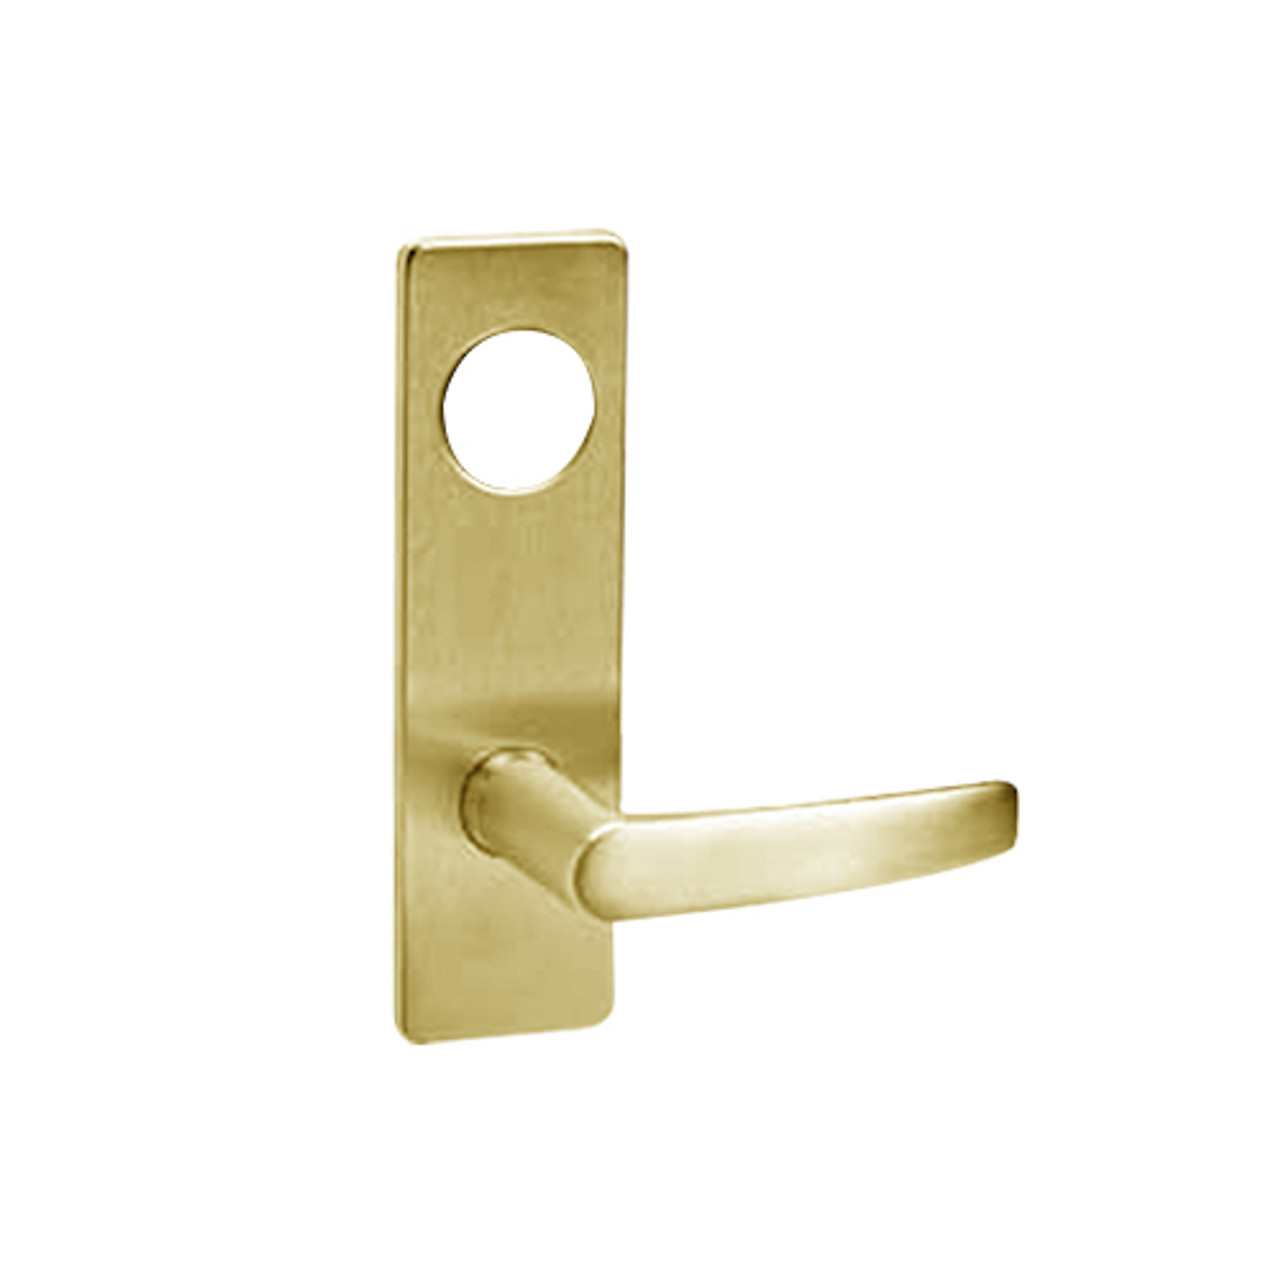 ML2048-ASM-605-CL6 Corbin Russwin ML2000 Series IC 6-Pin Less Core Mortise Entrance Locksets with Armstrong Lever in Bright Brass